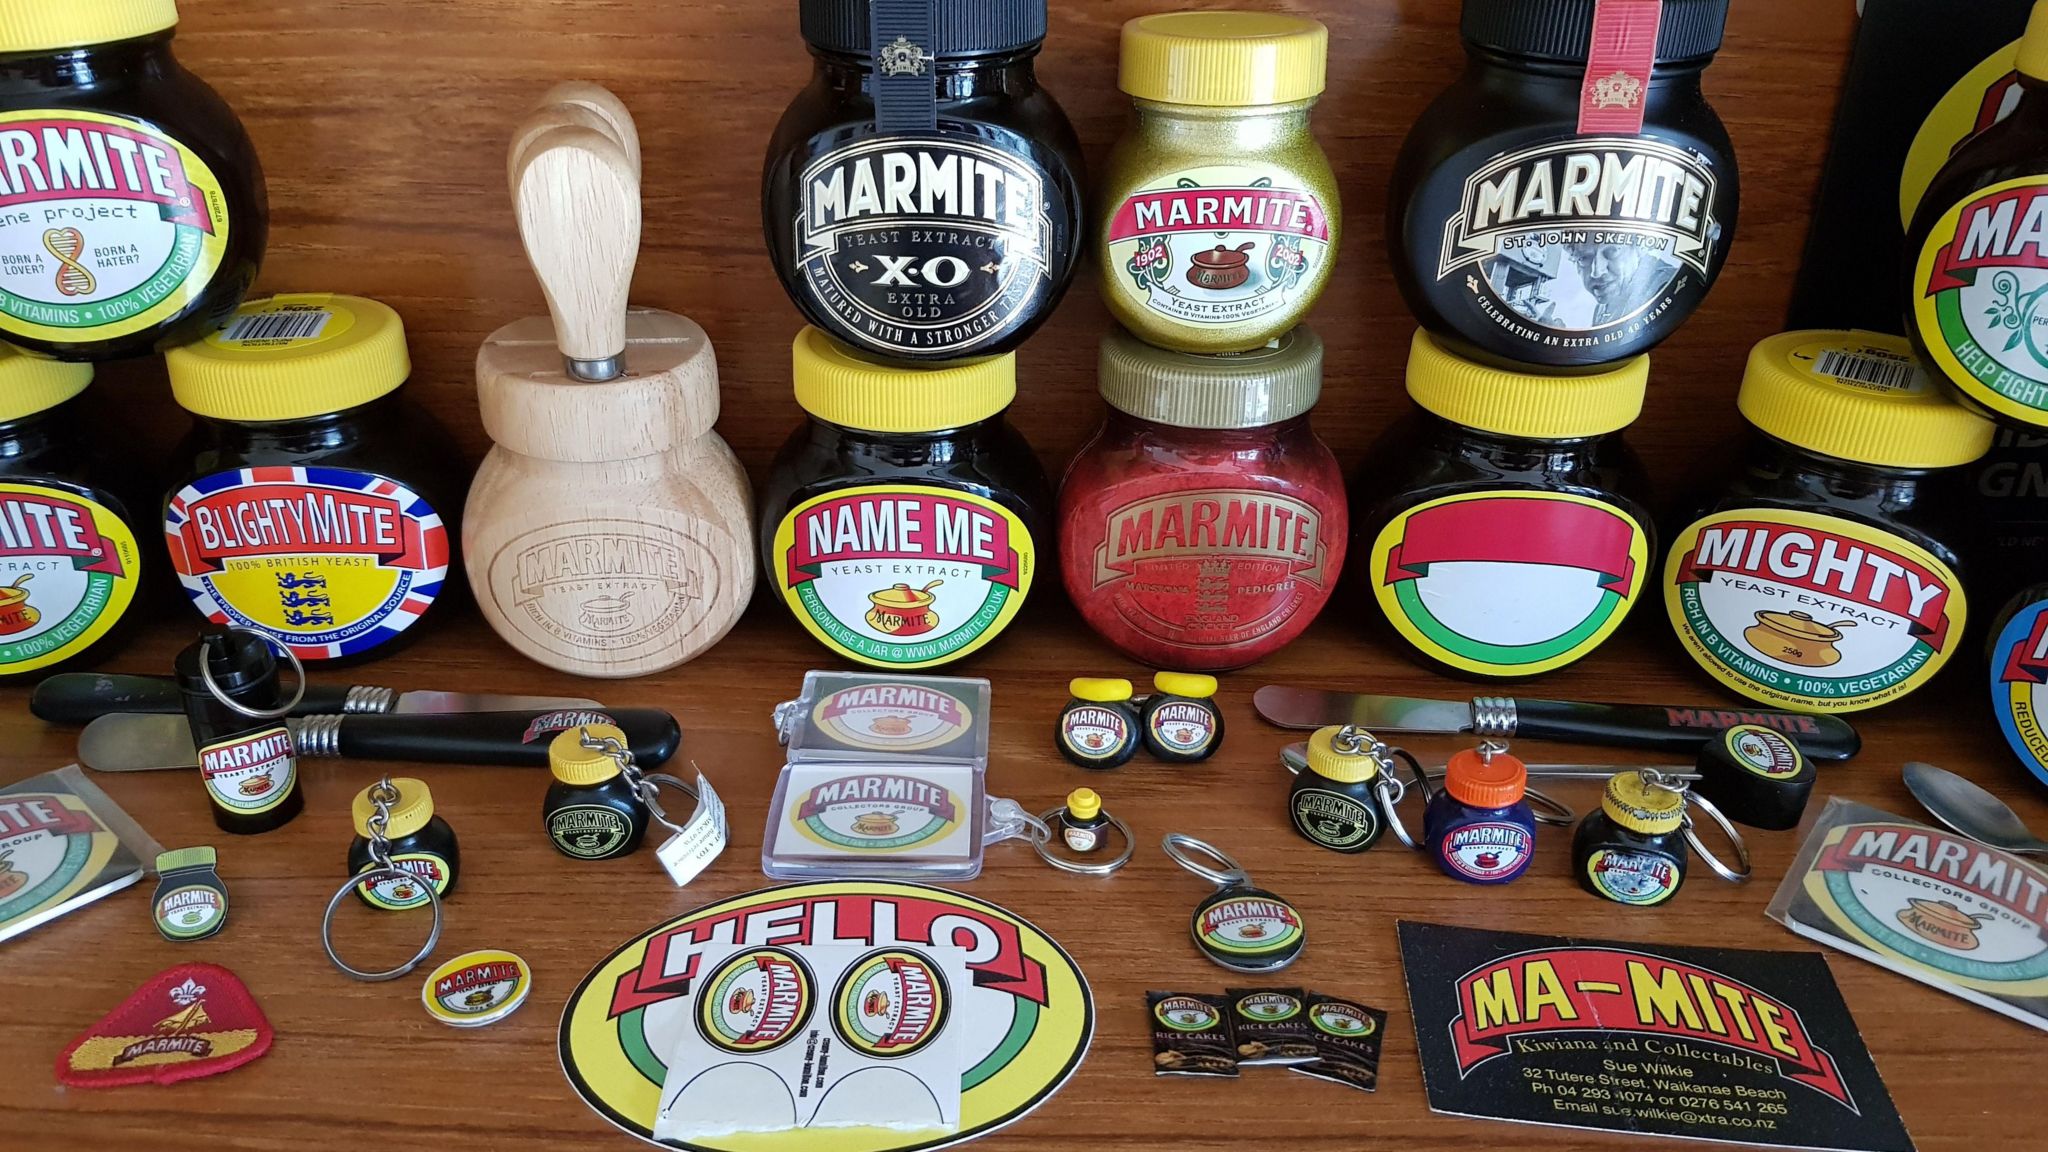 Jars of marmite and marmite related memorabilia on a wooden work surface